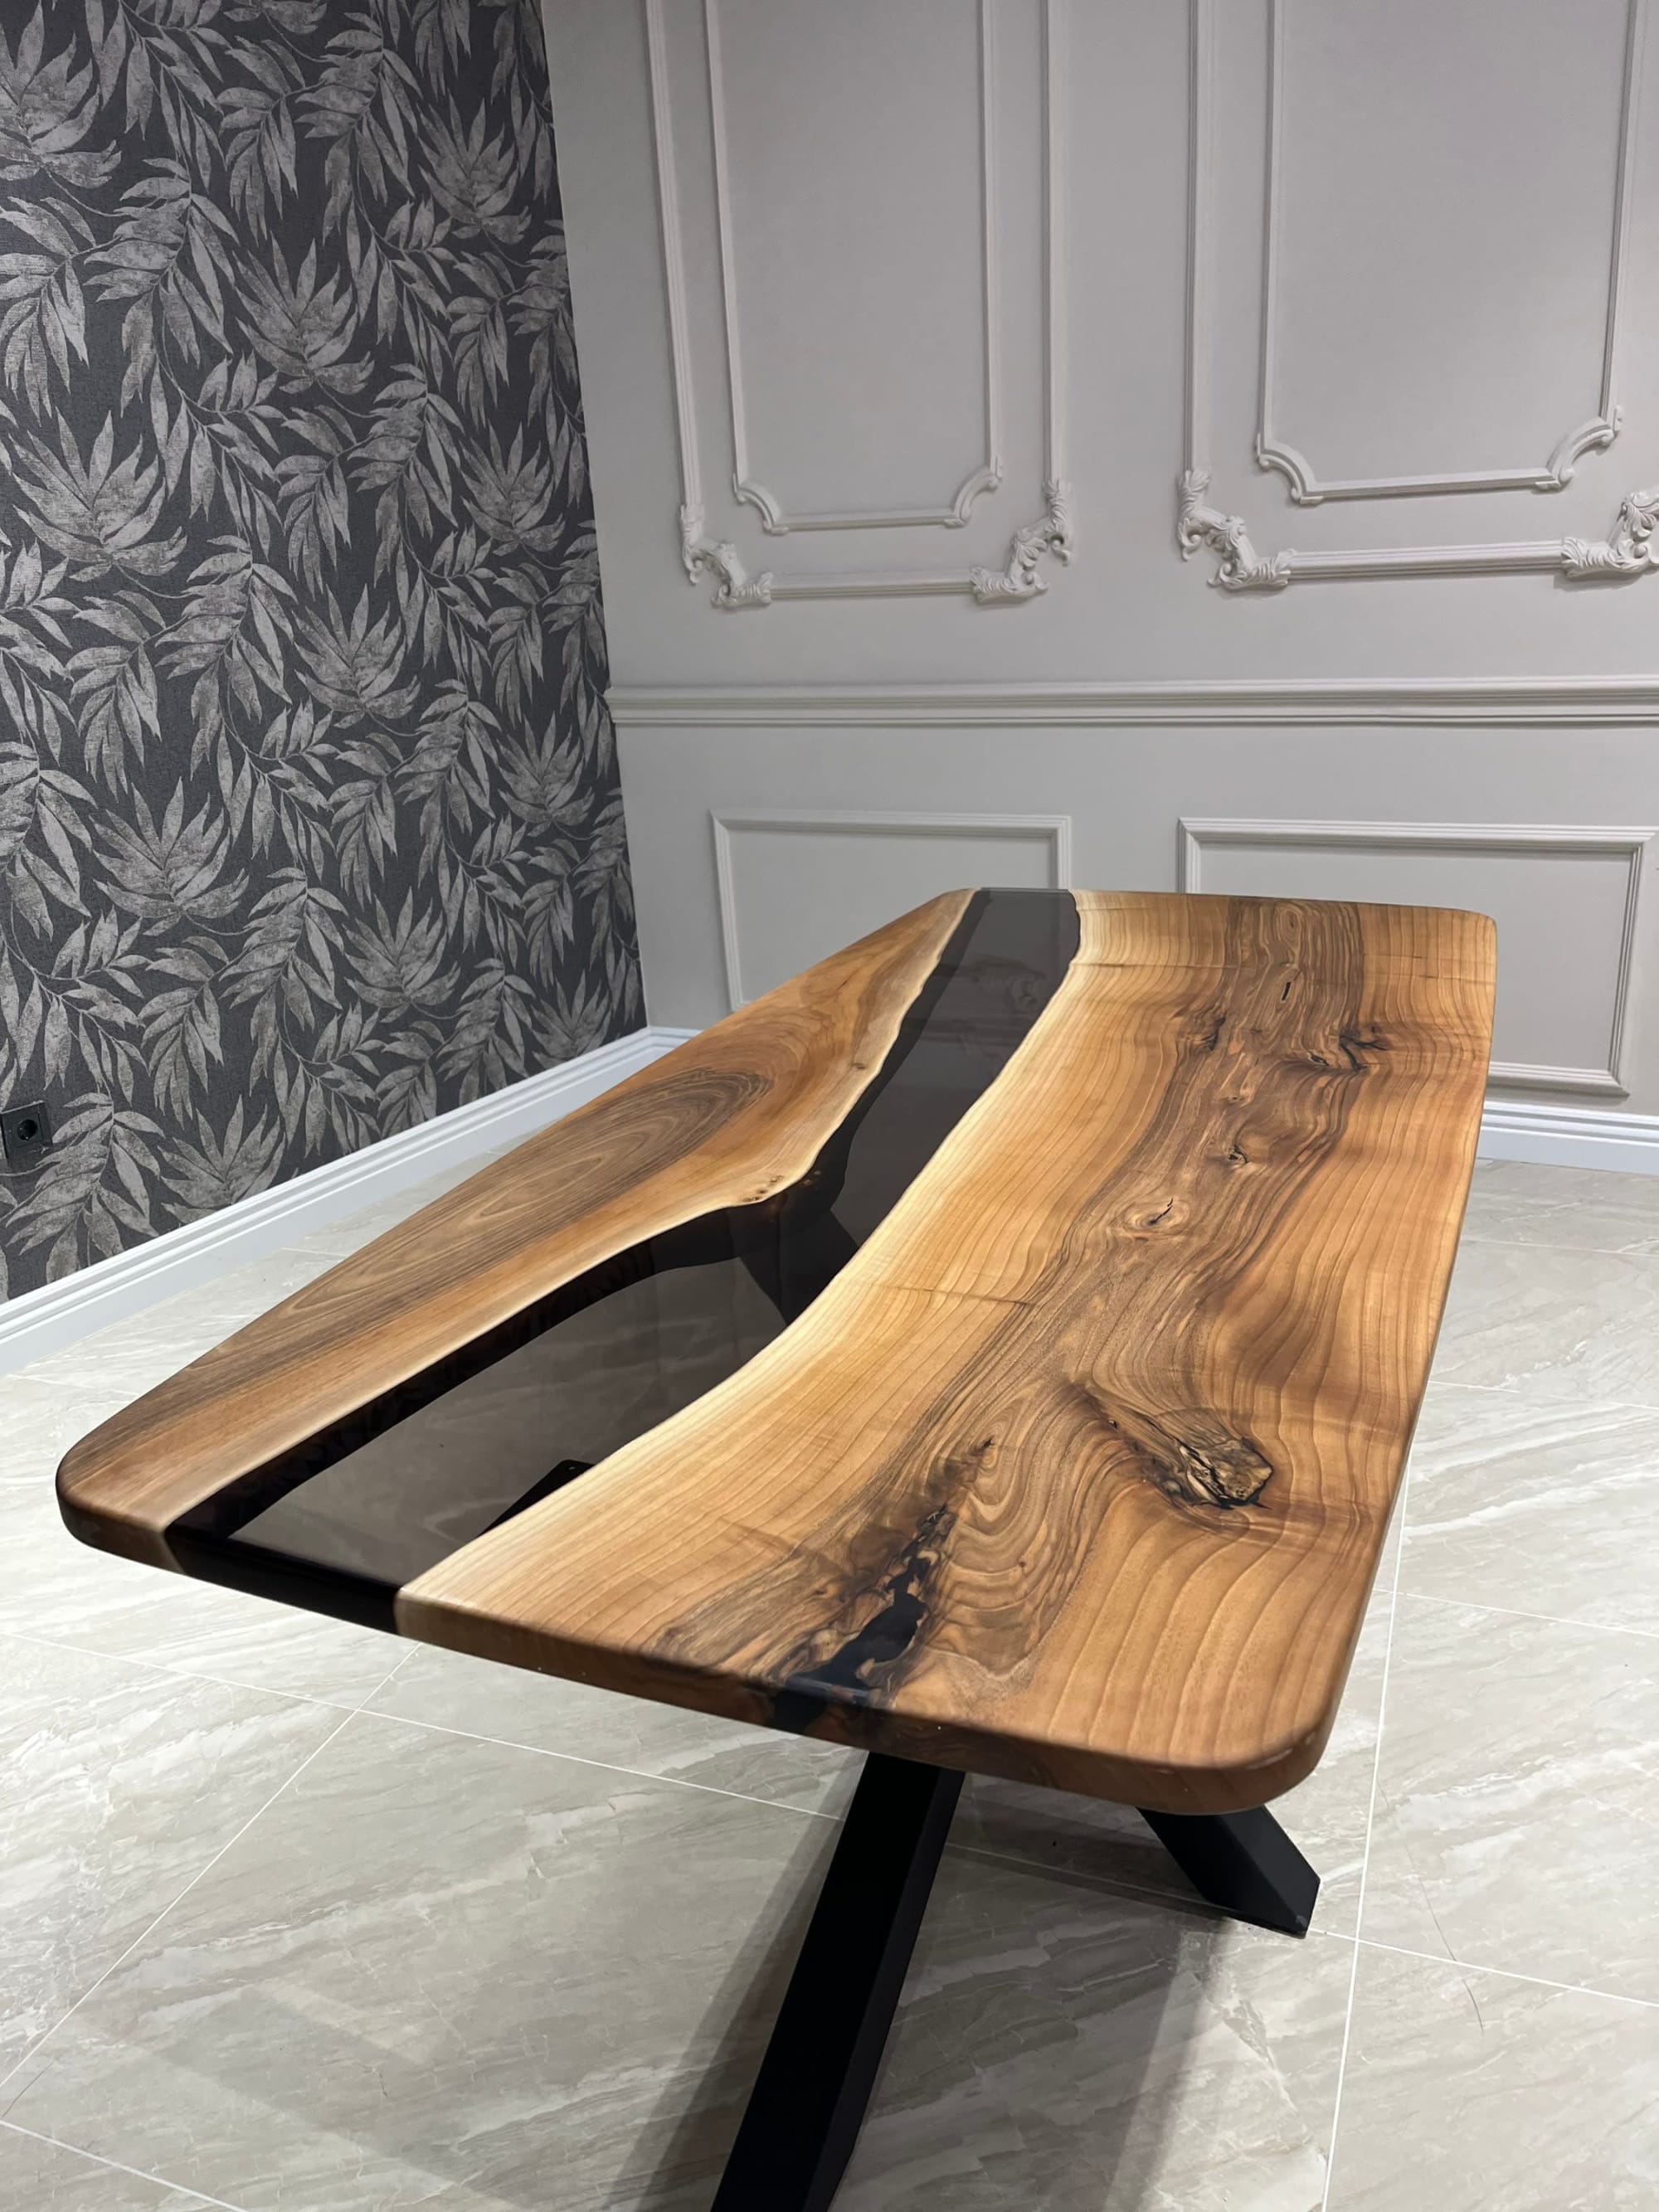 Walnut epoxy resin Dining Table with transparent resin river, made to order